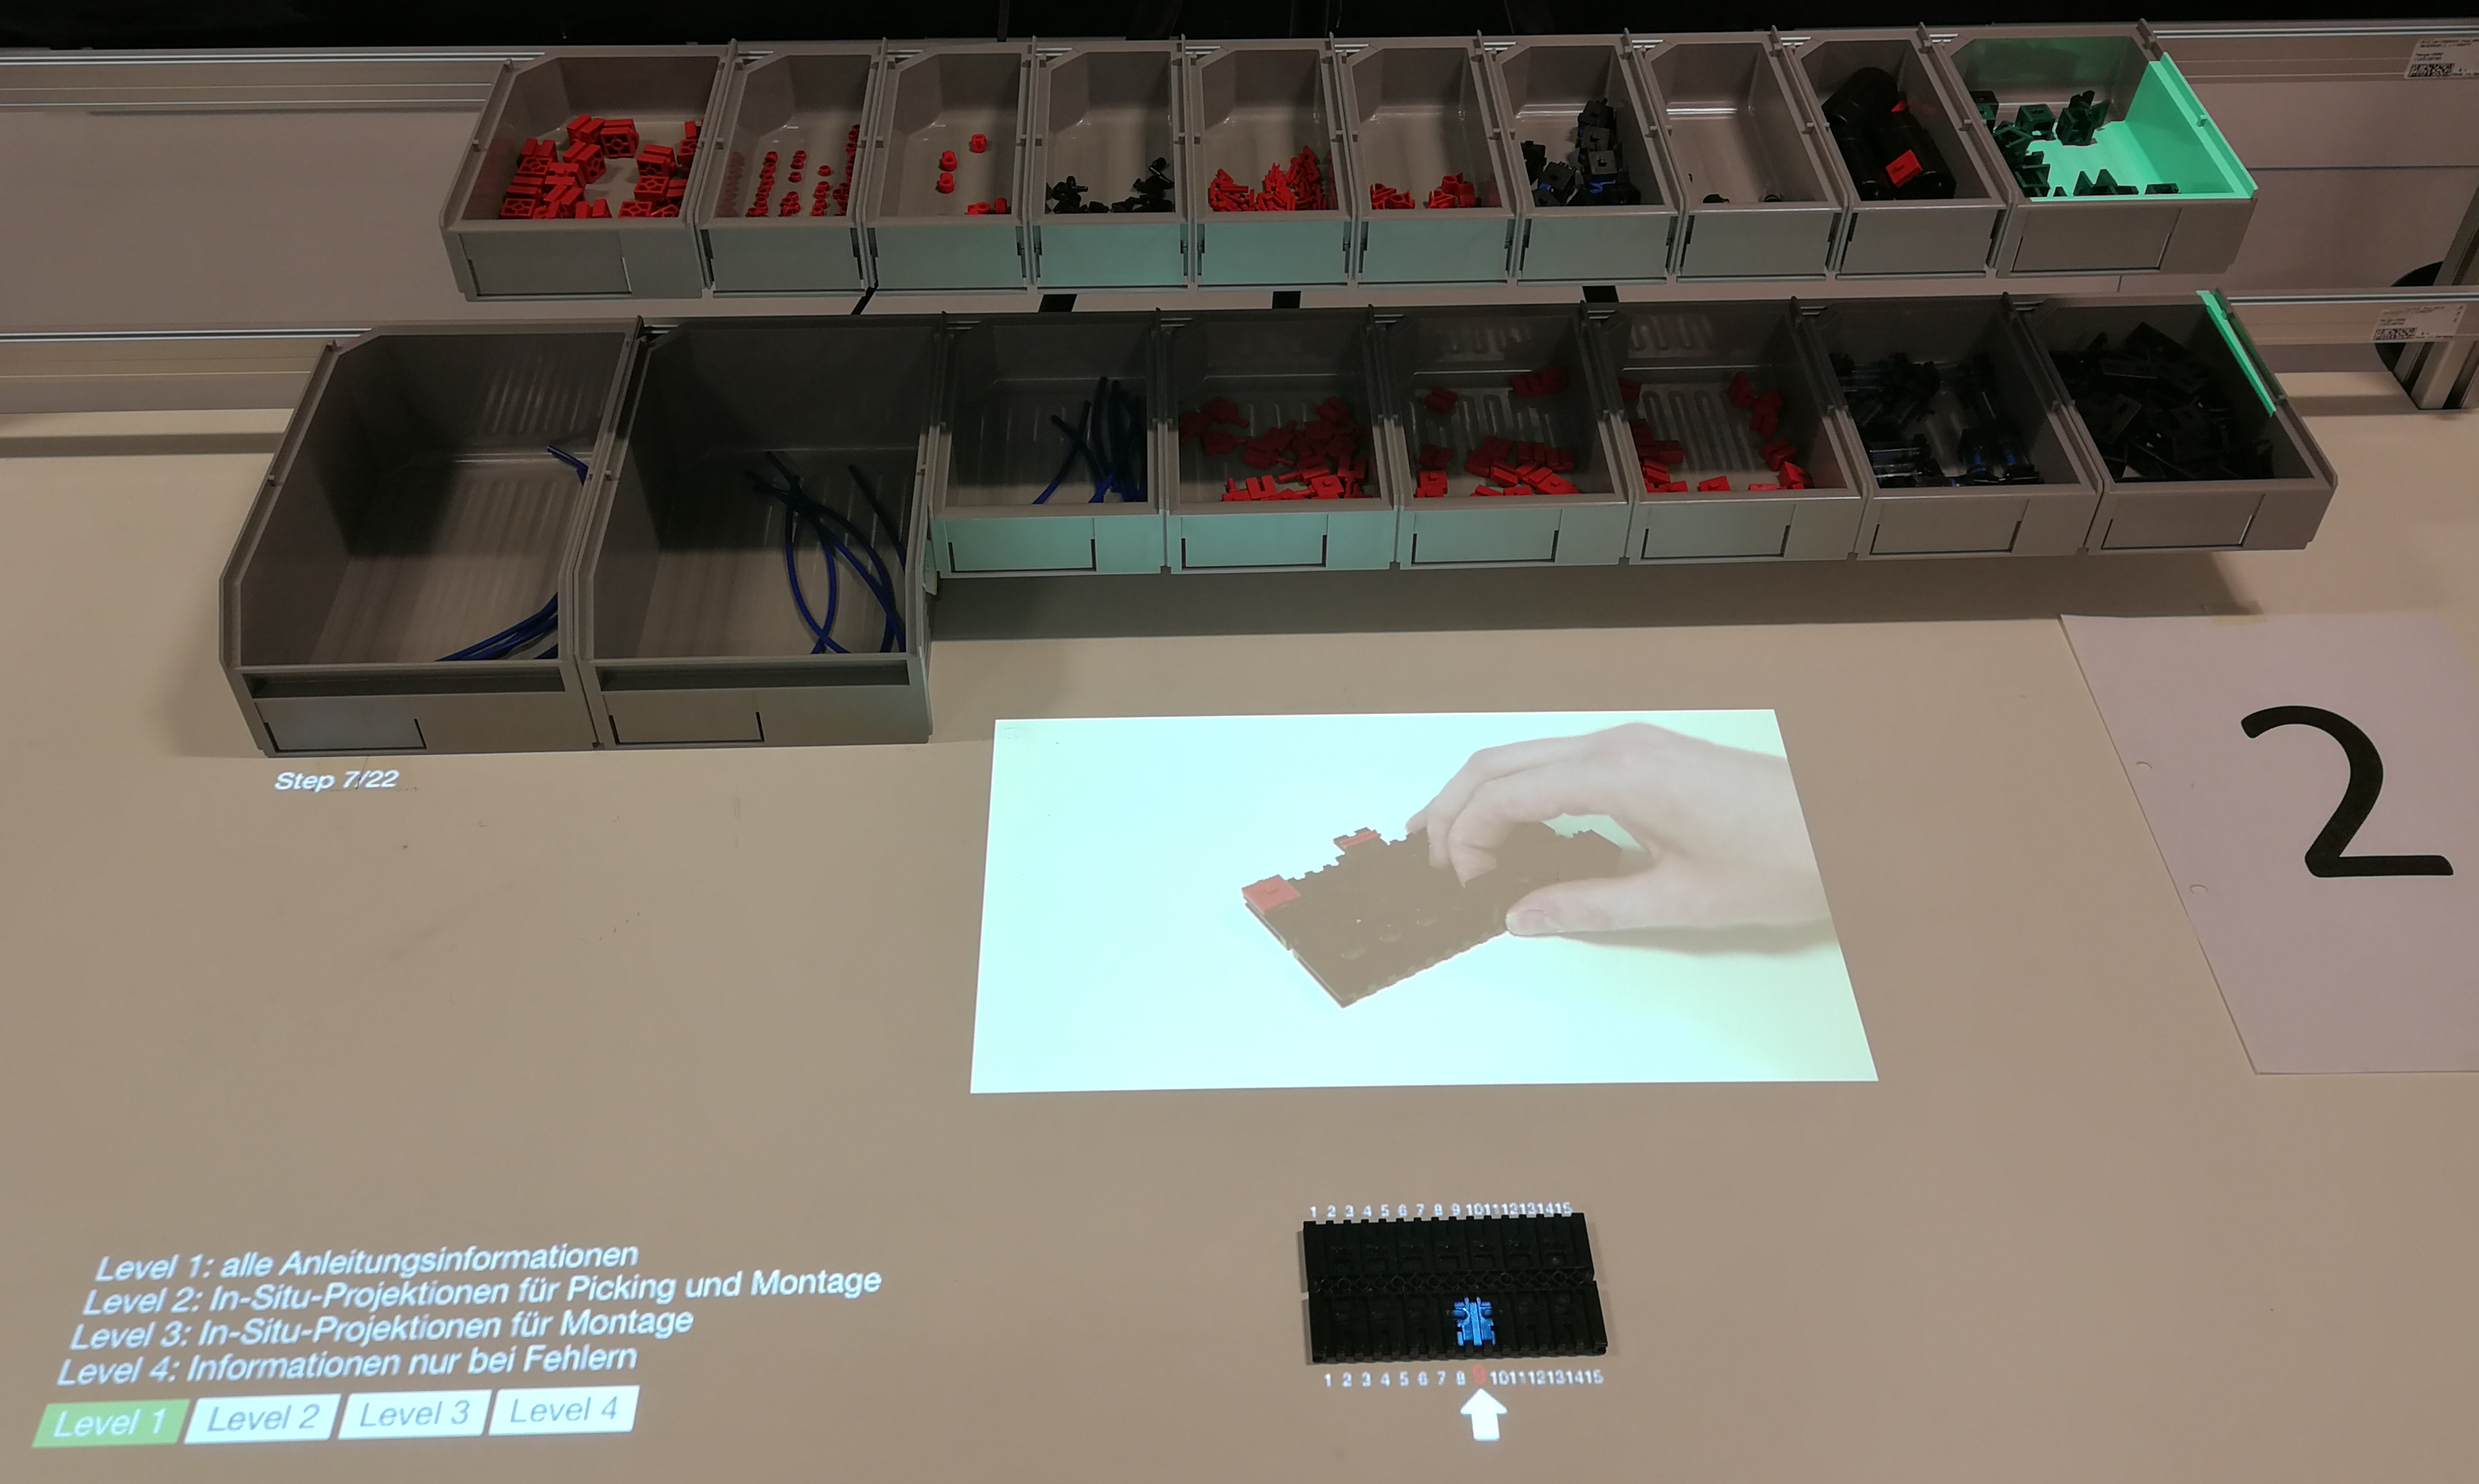 Augmented Reality Training for Industrial Assembly Work – Are Projection-based AR Assistive Systems an Appropriate Tool for Assembly Training?